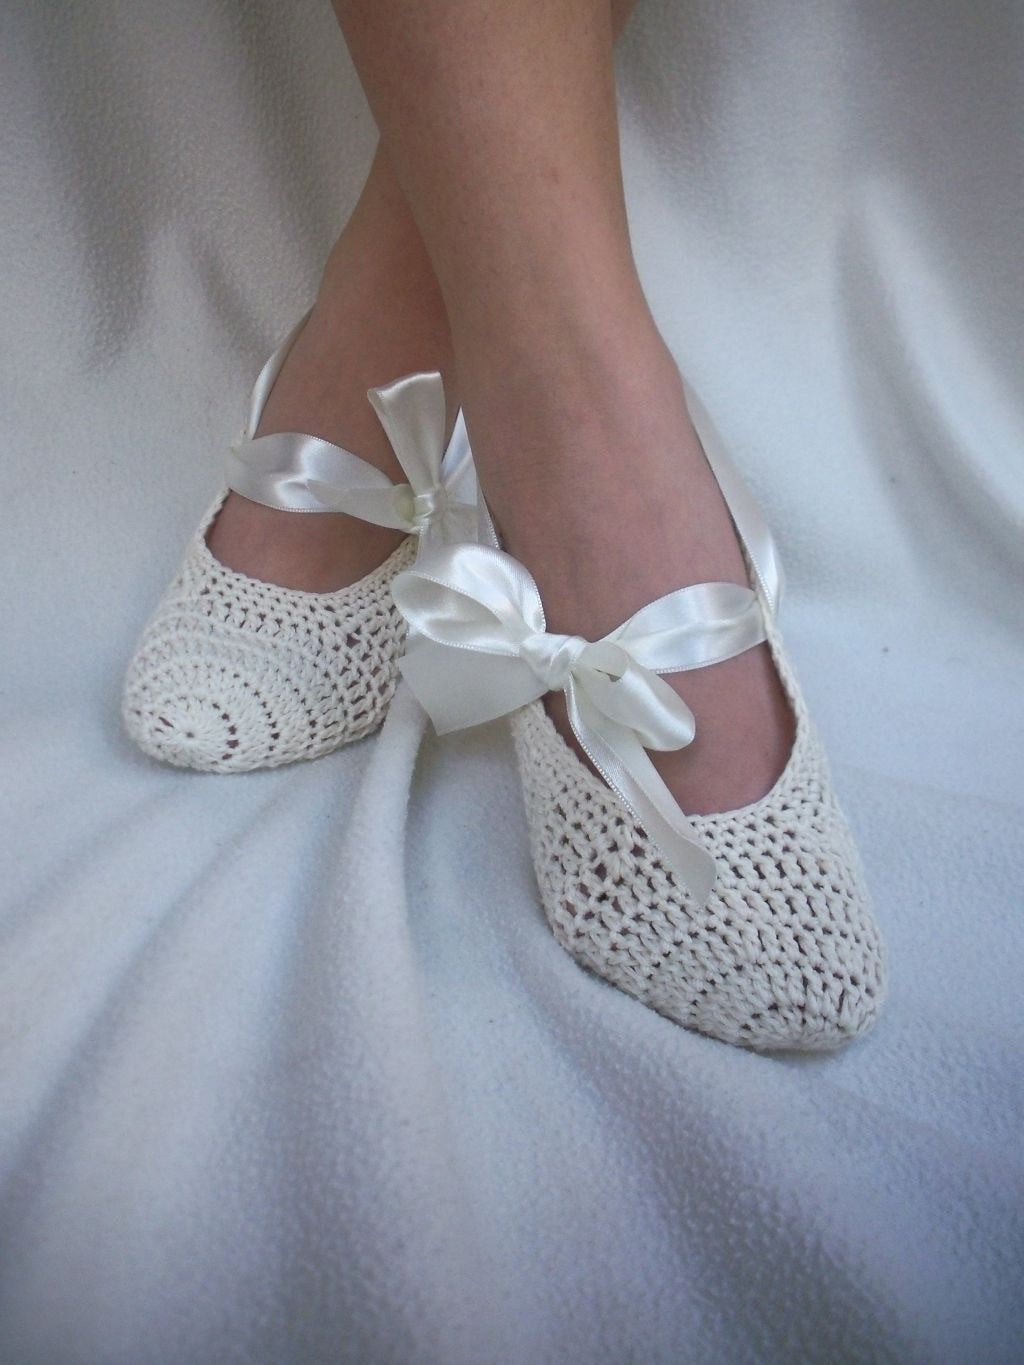 Wedding Dancing Shoes
 Bridal wedding dance shoes slippers Cream Bridal Party